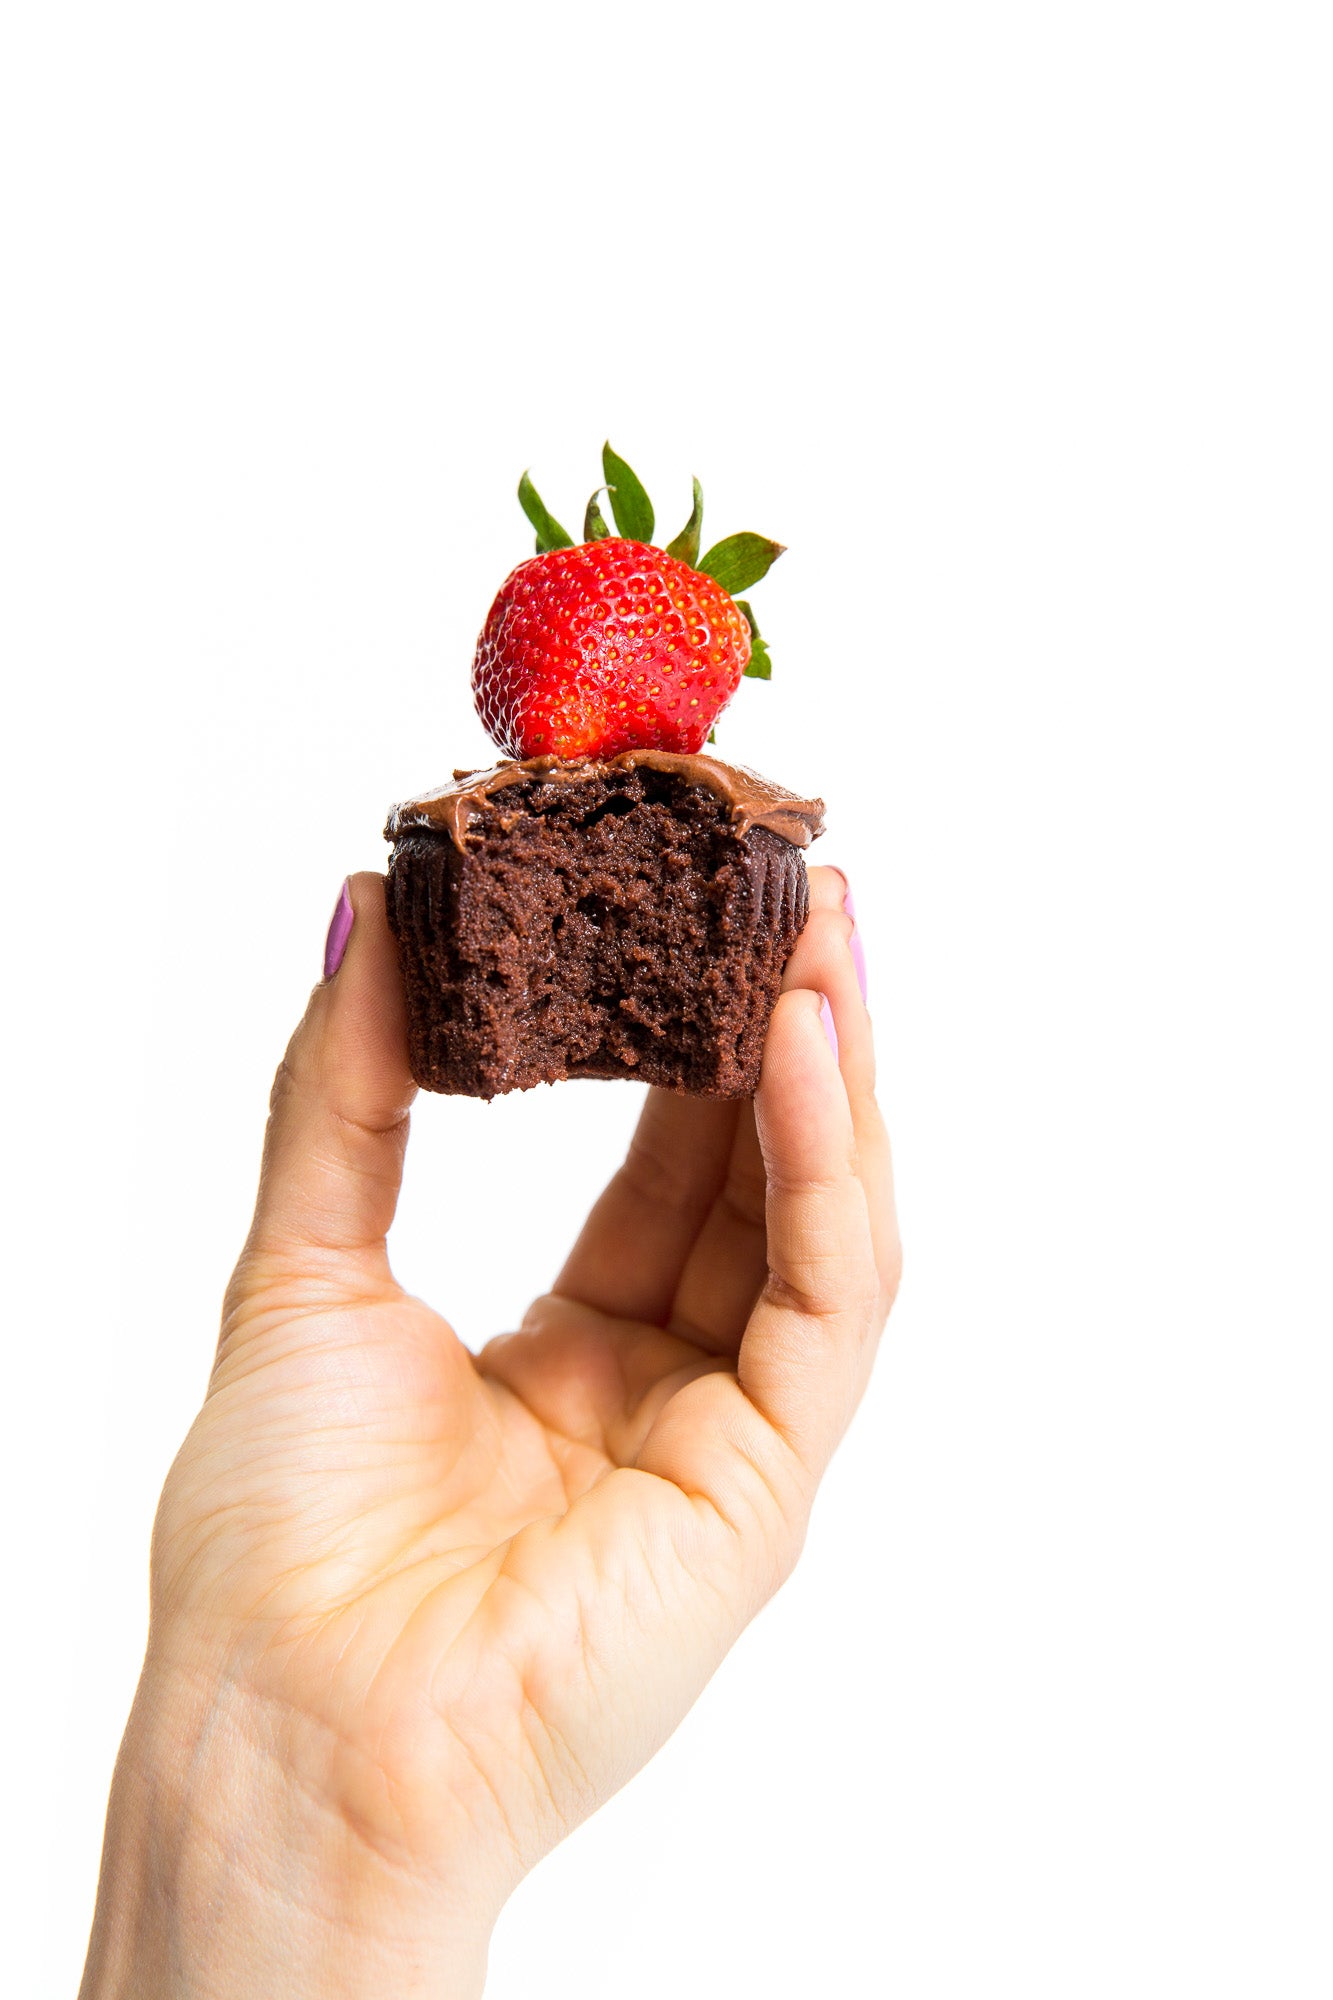 A hand holding a half eaten Miss Jones Baking Co Chocolate Hazelnut cupcake with a strawberry on top